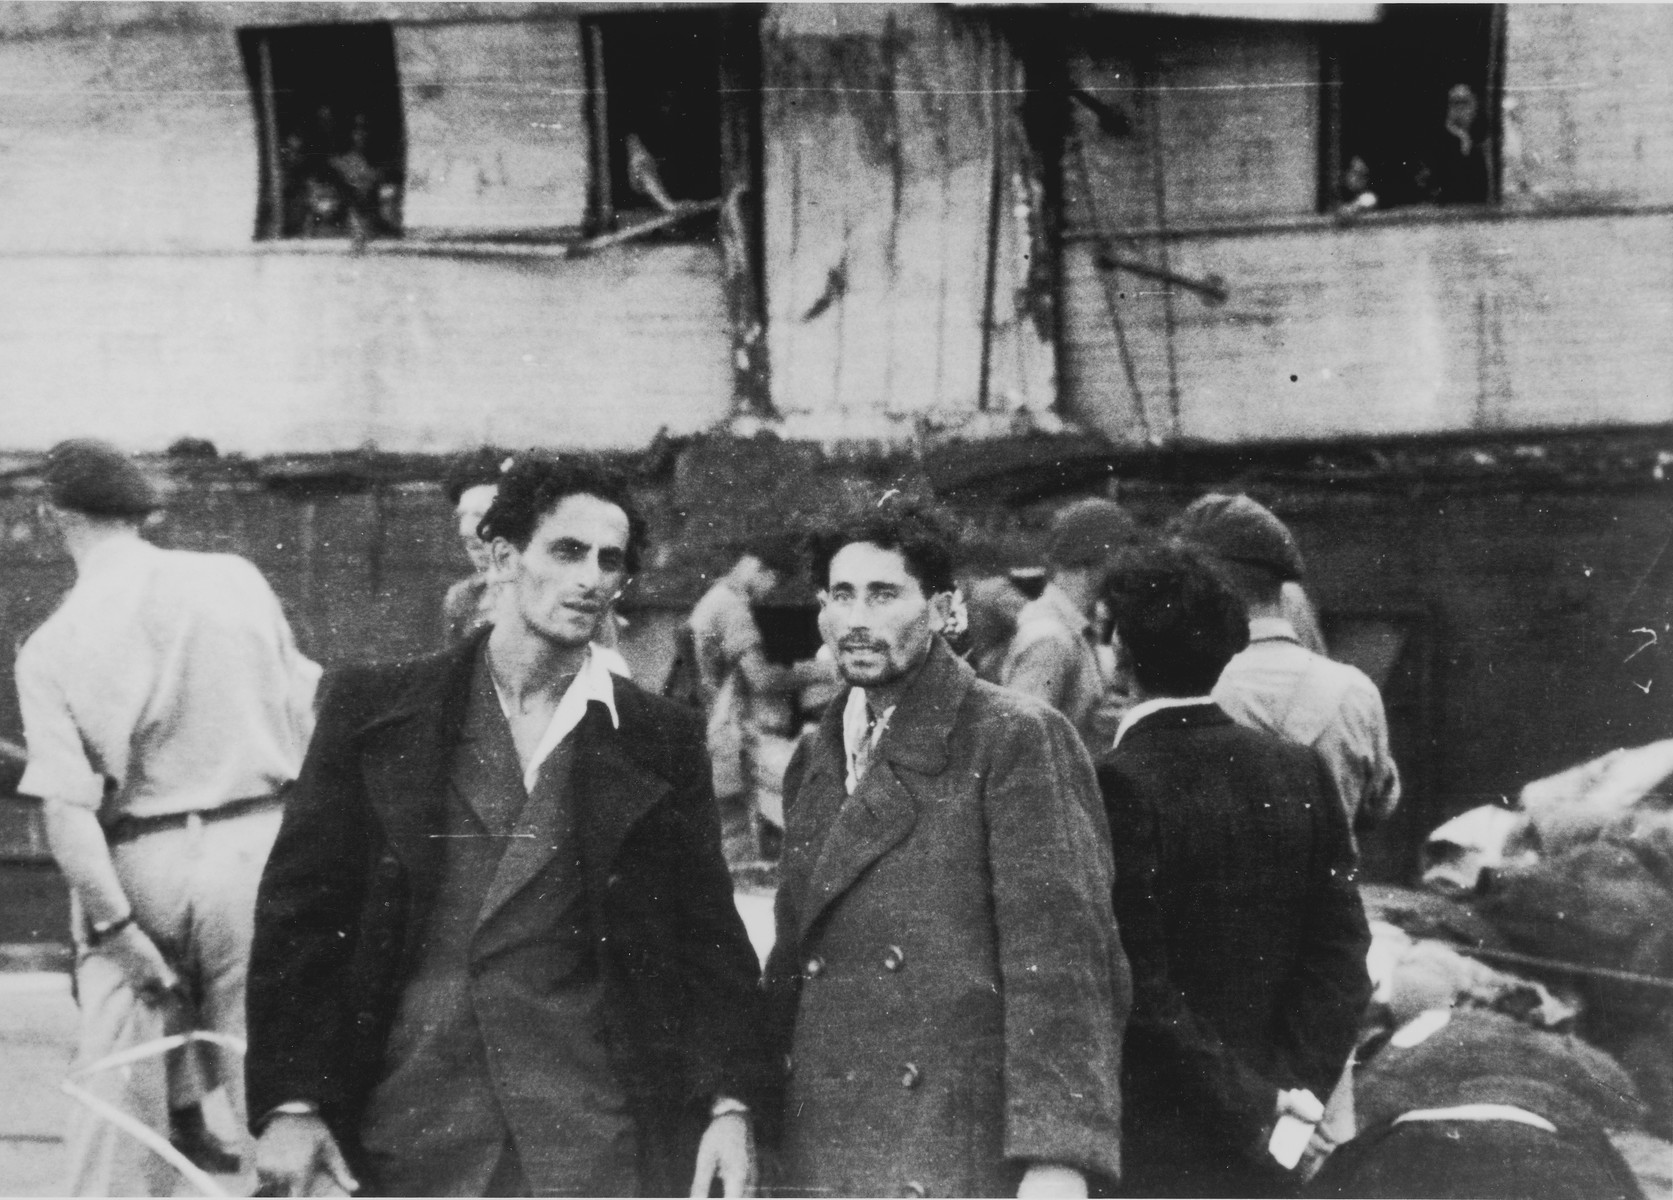 Two passengers from the illegal immigrant ship, Exodus 1947, stand on the dock in Haifa harbor in front of the battered ship.